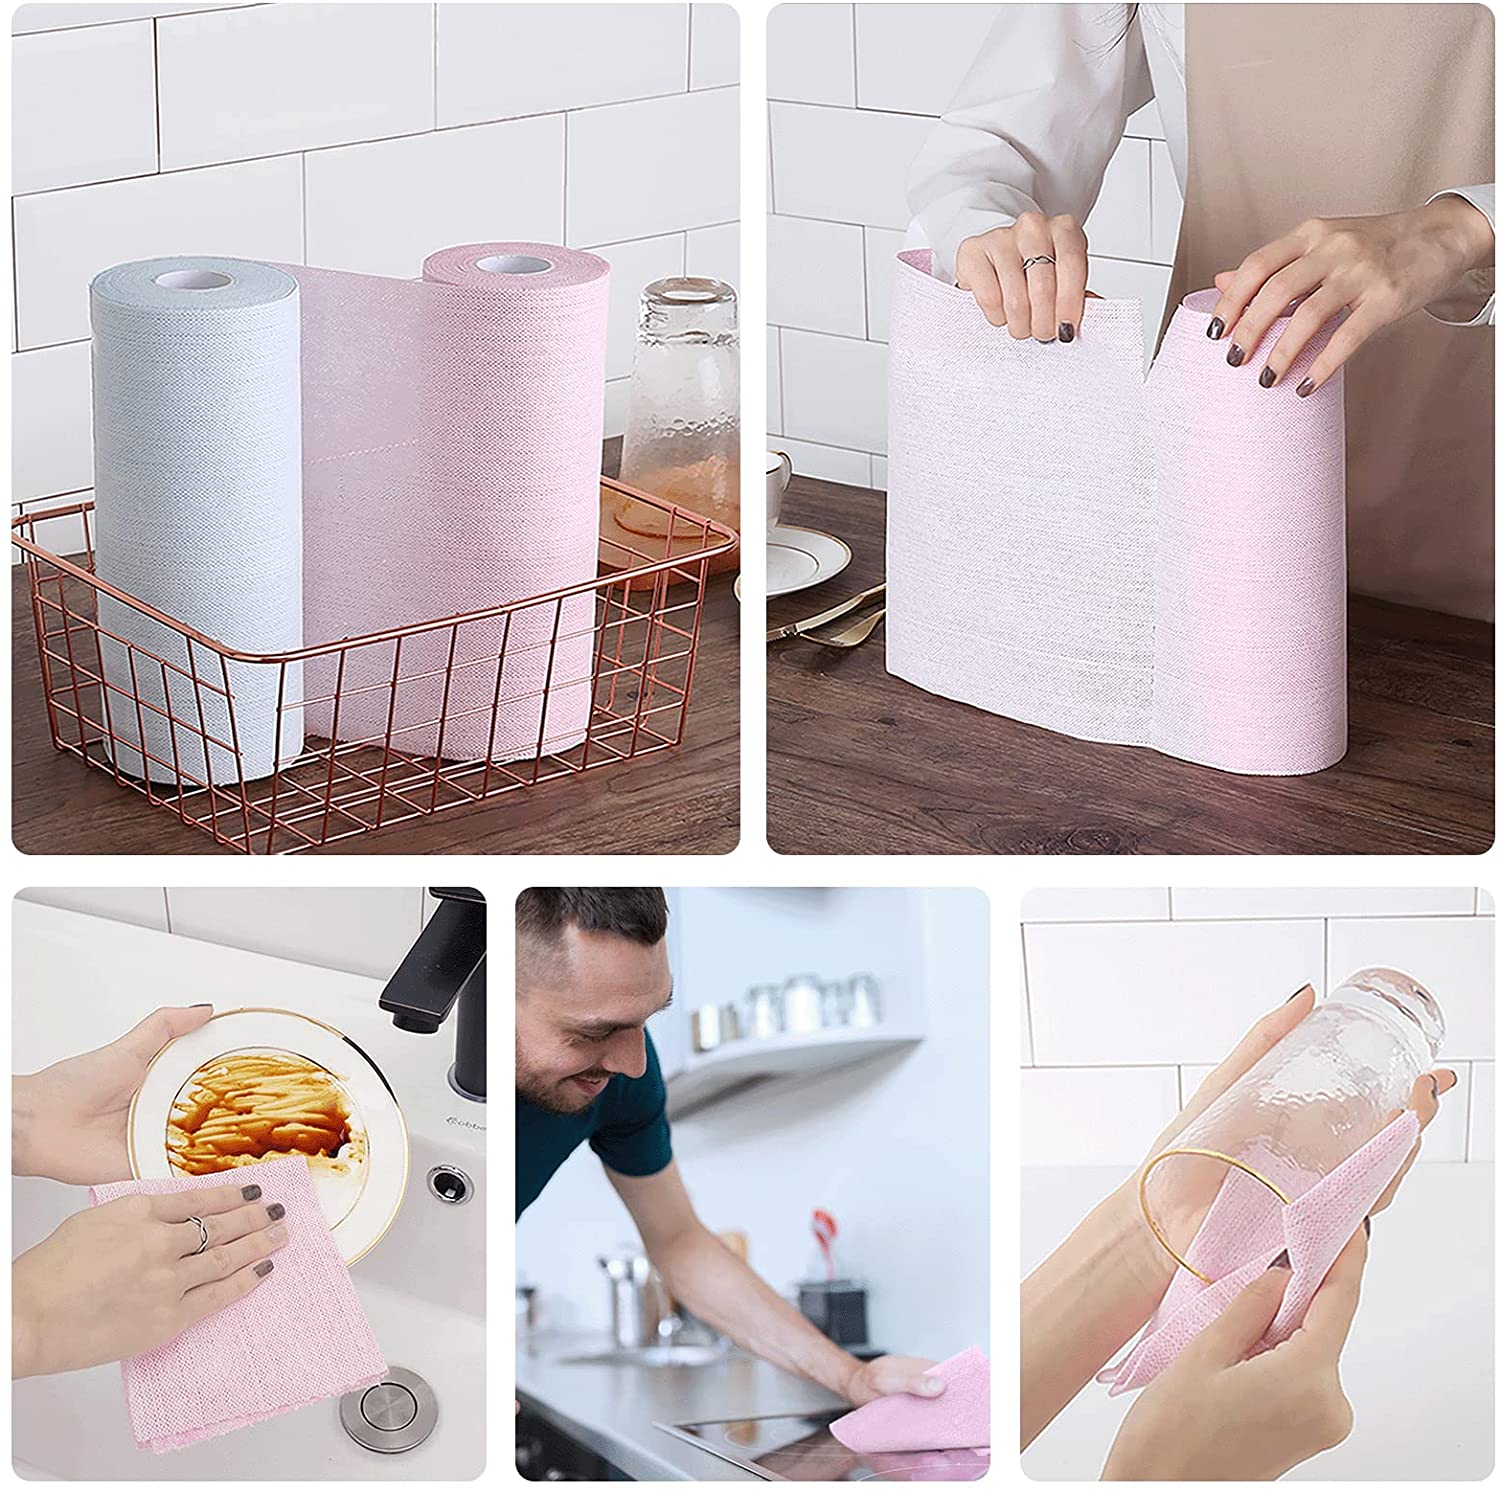 KitchLife Reusable Bamboo Paper Towels - 3 Rolls, (Tricolor)